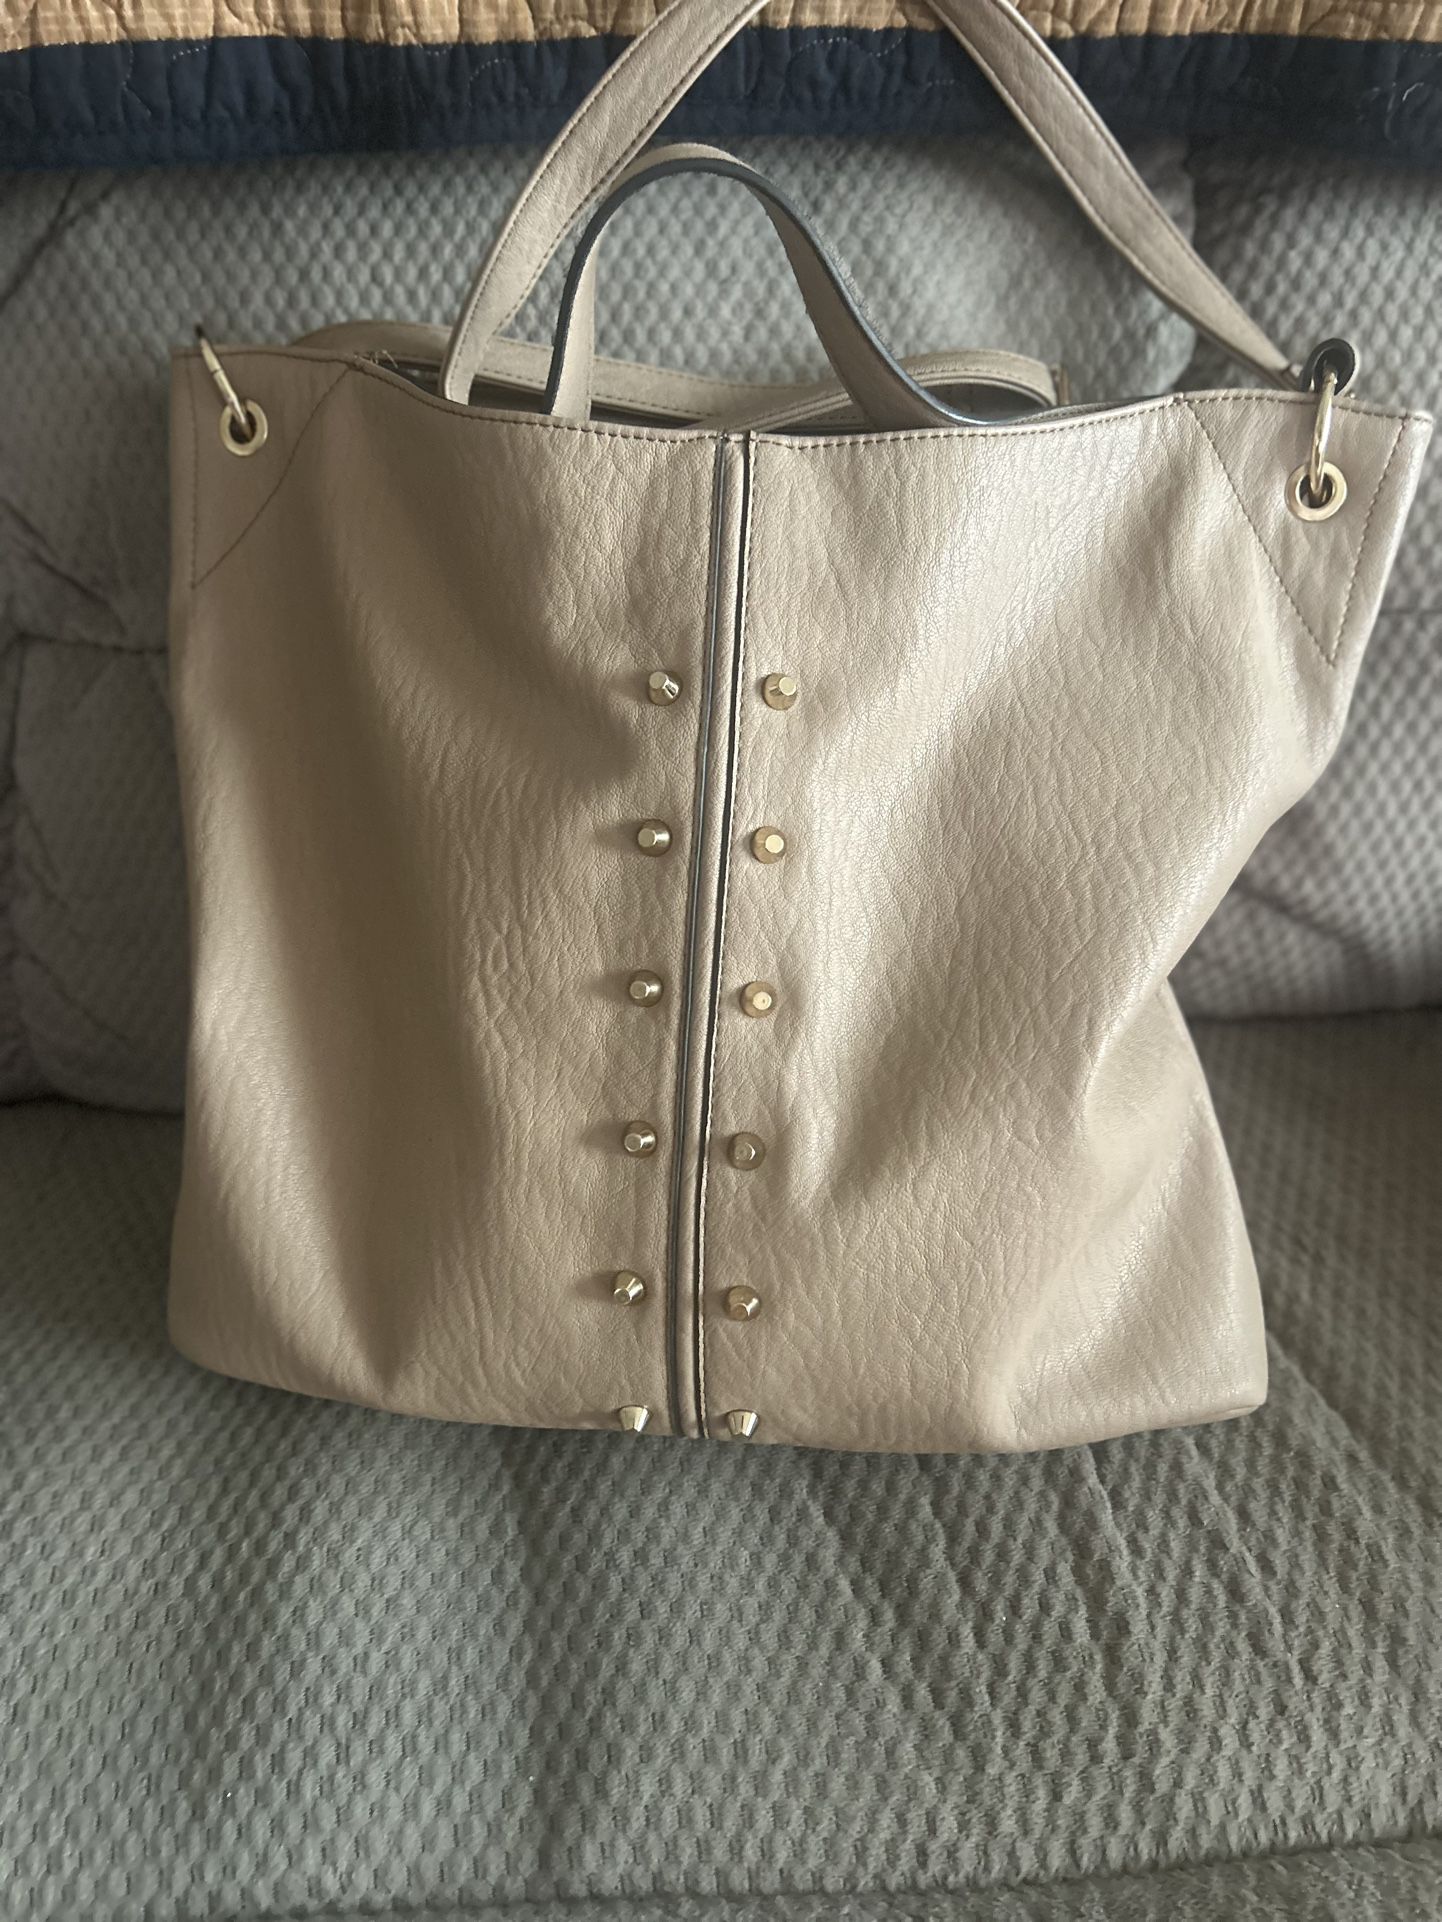 Beige Jessica Simpson  Saddle Bag. 2 Carry Handles Carried 1 Time 